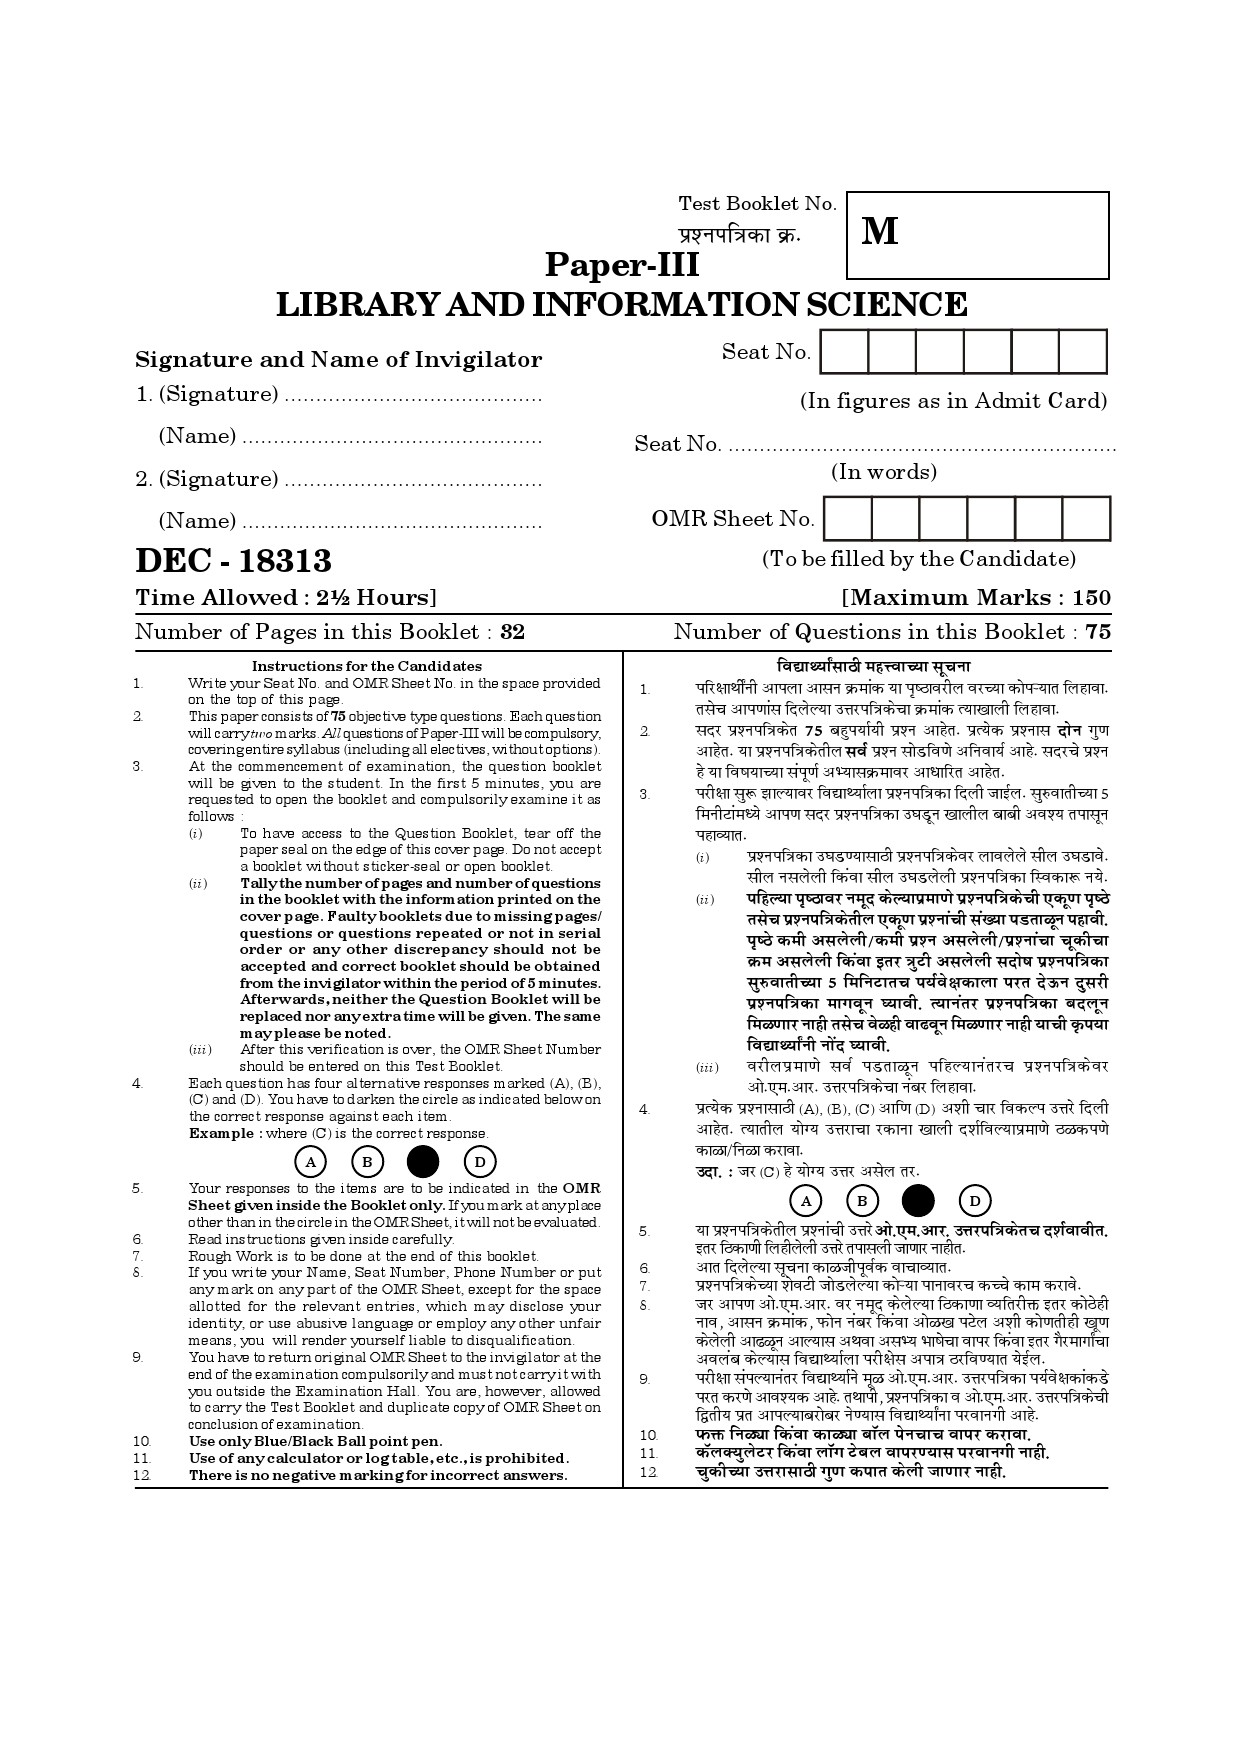 Maharashtra SET Library Information Science Question Paper III December 2013 1